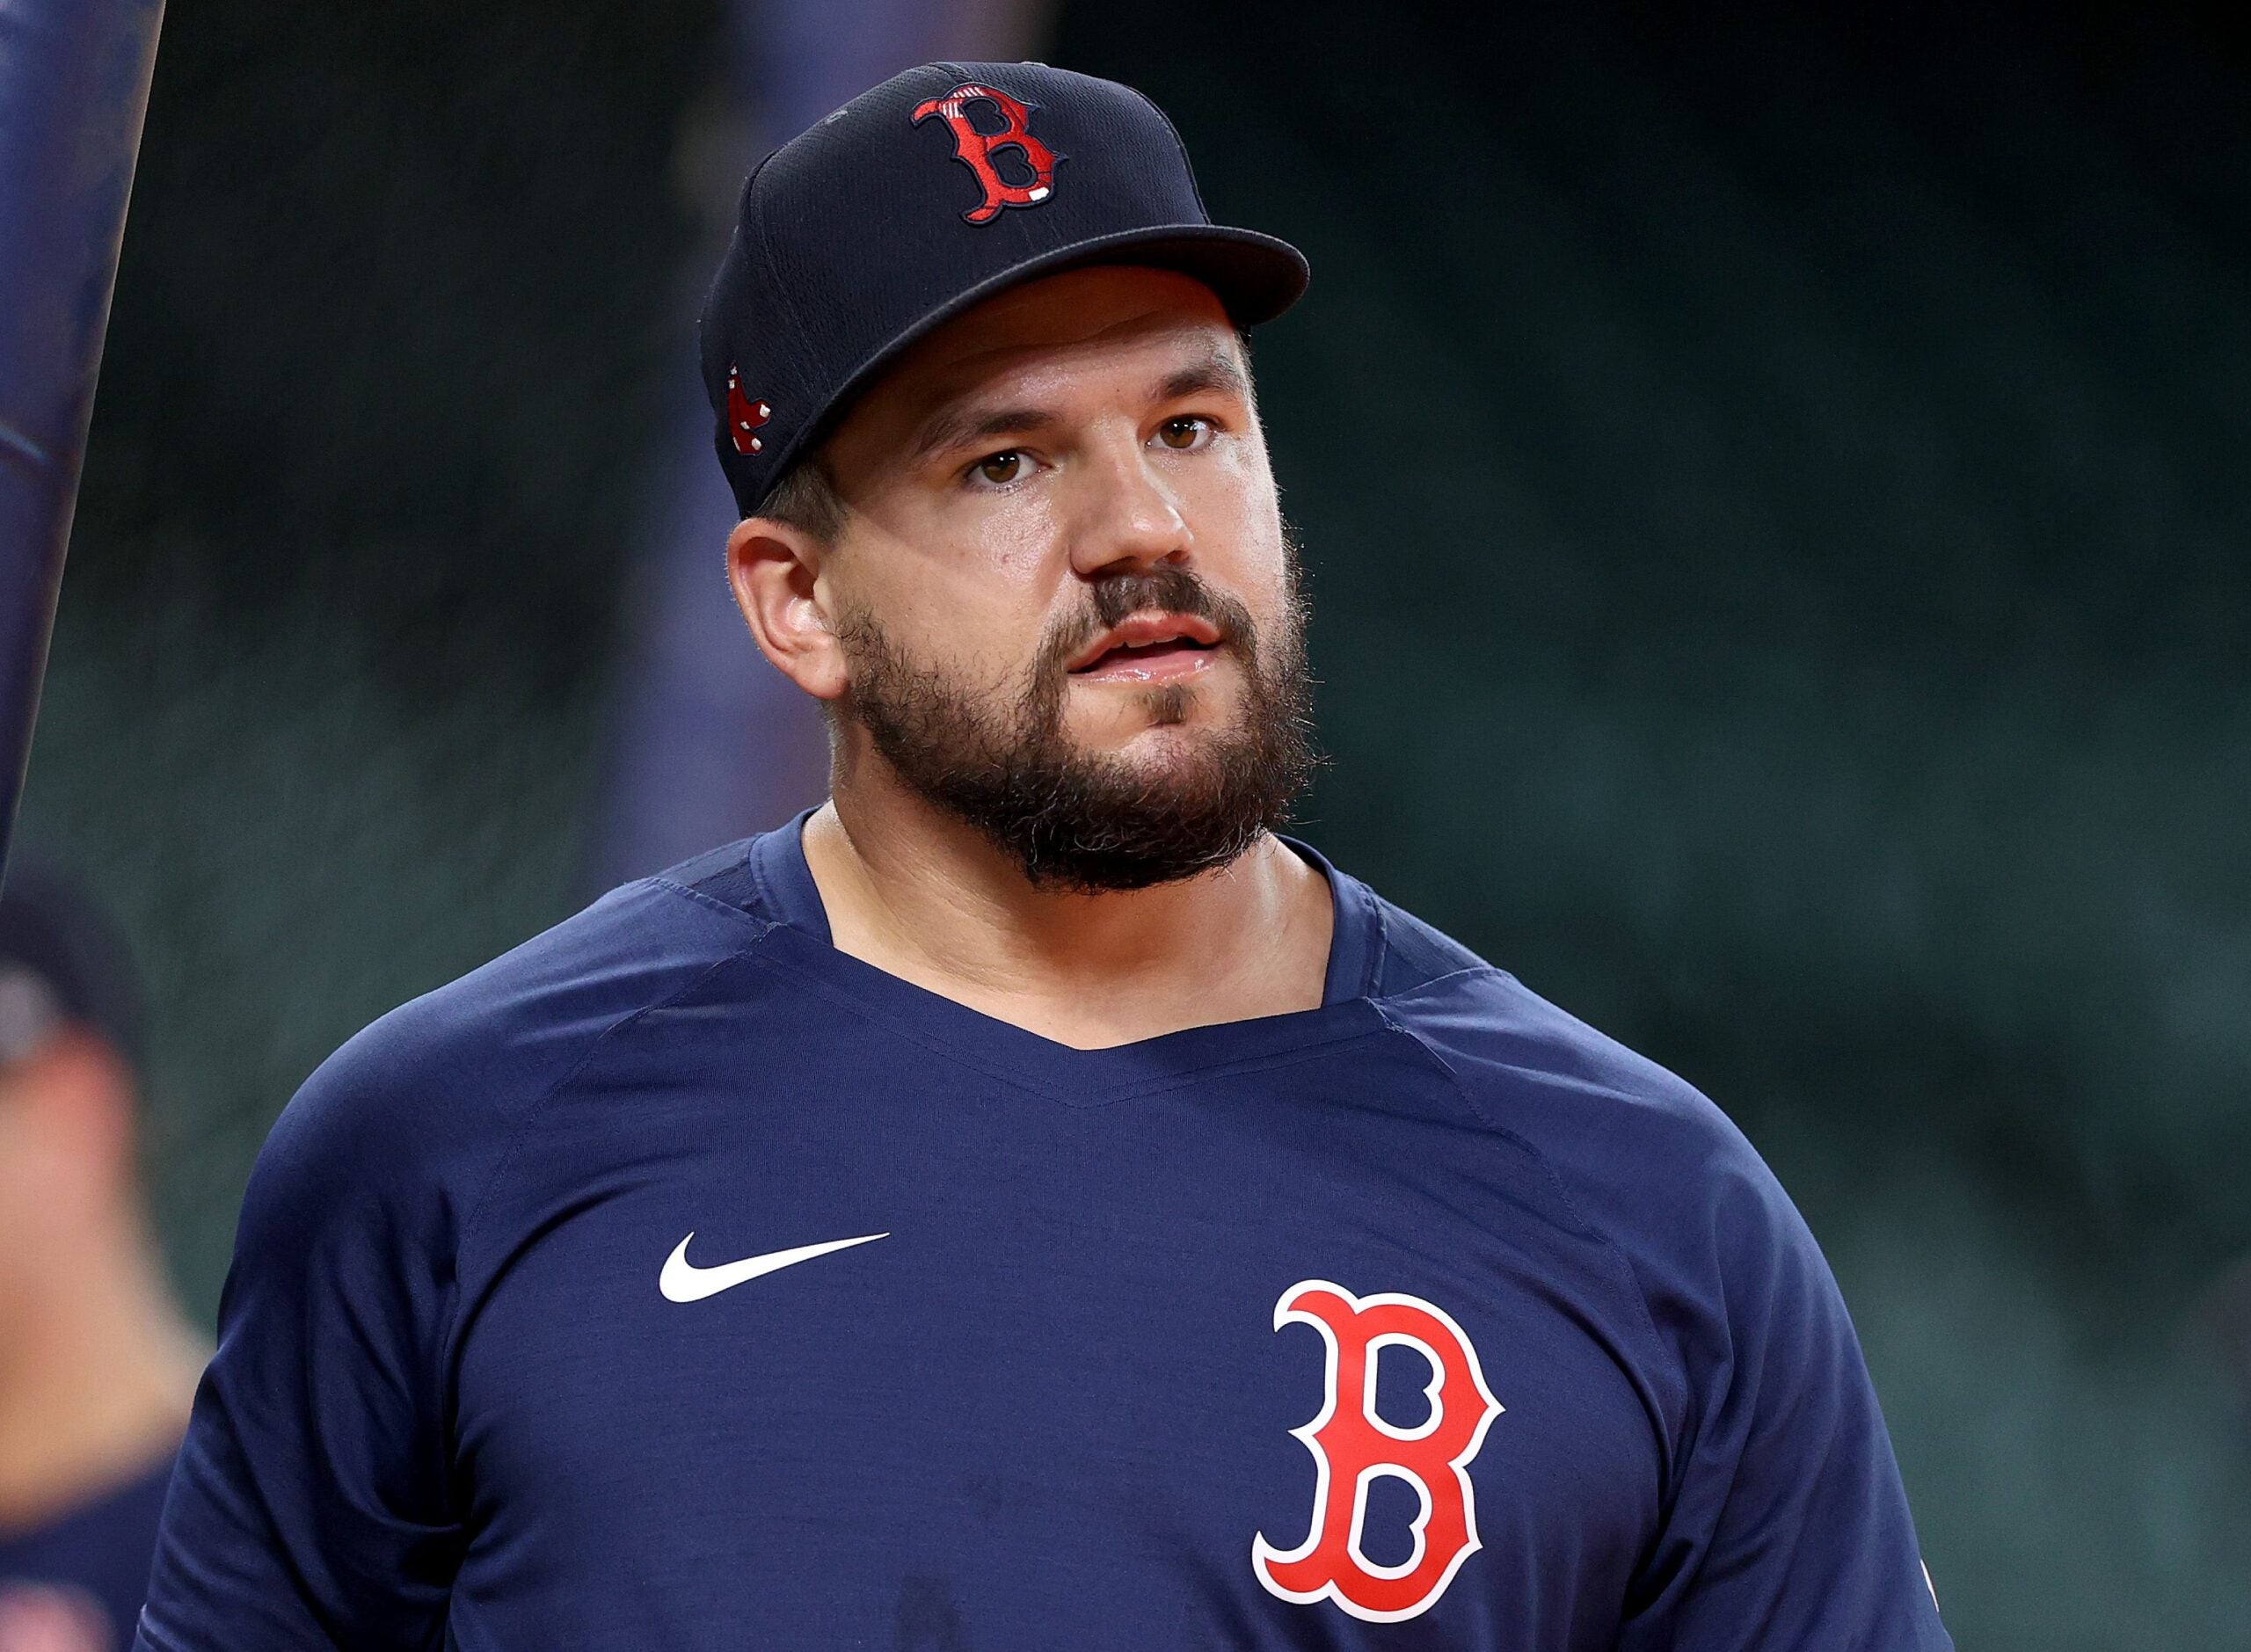 More Facts About Kyle Schwarber’s Net Worth In 2022